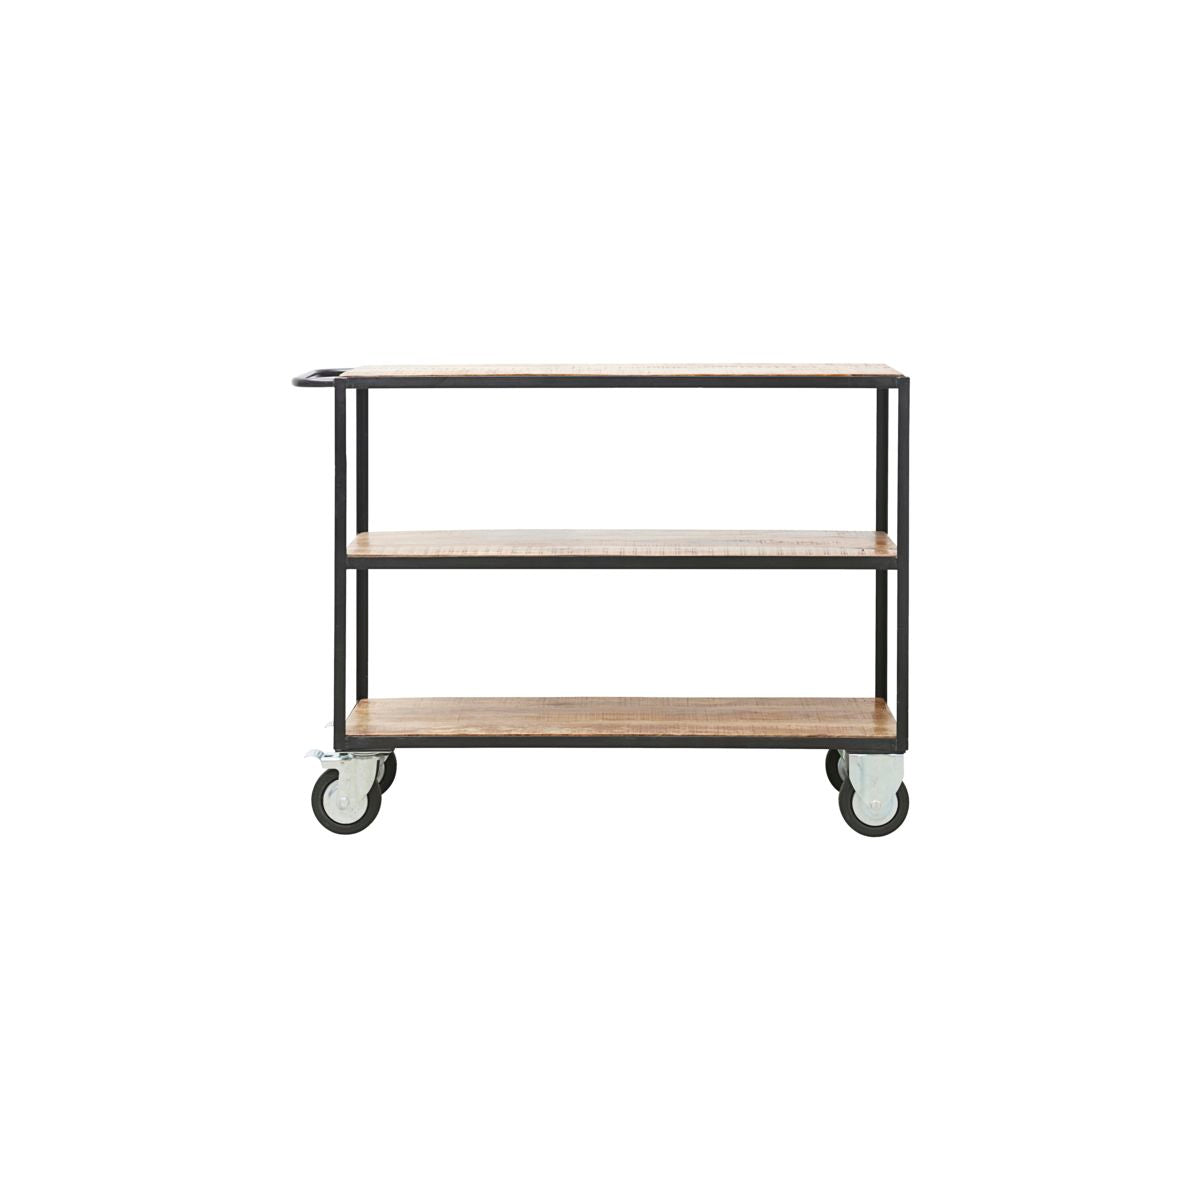 Small Shelving Unit with 4 Wheels, Black/Wood